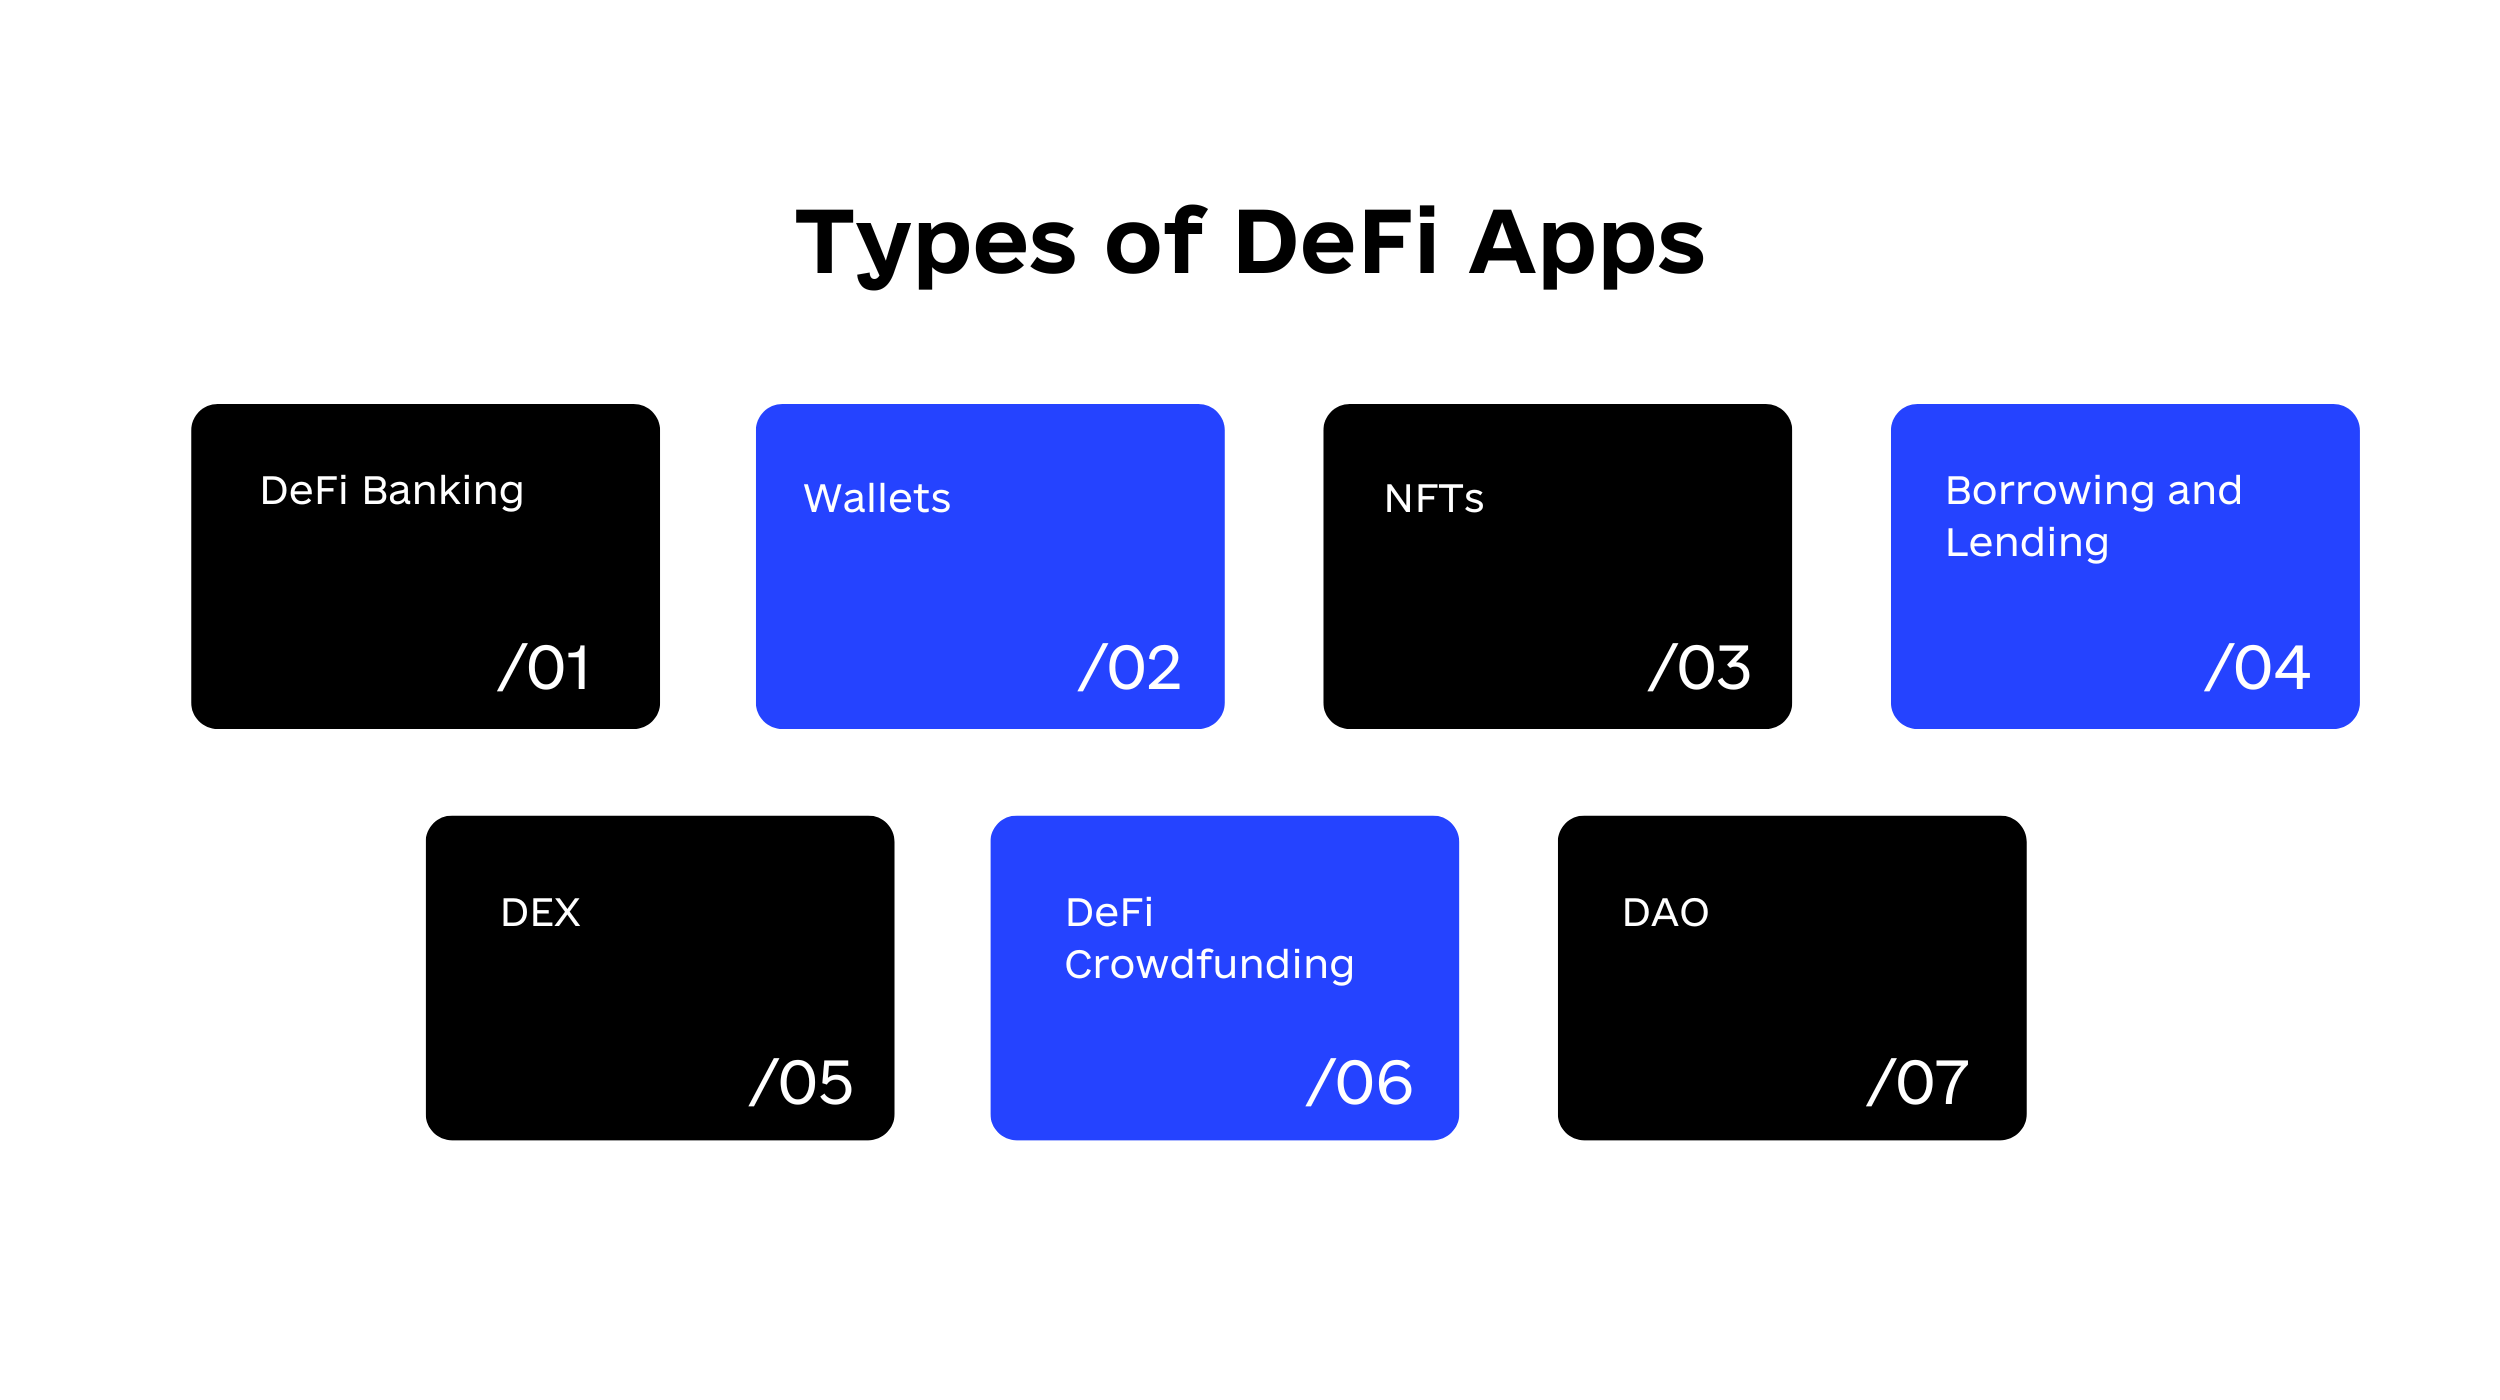 Types of DeFi Apps